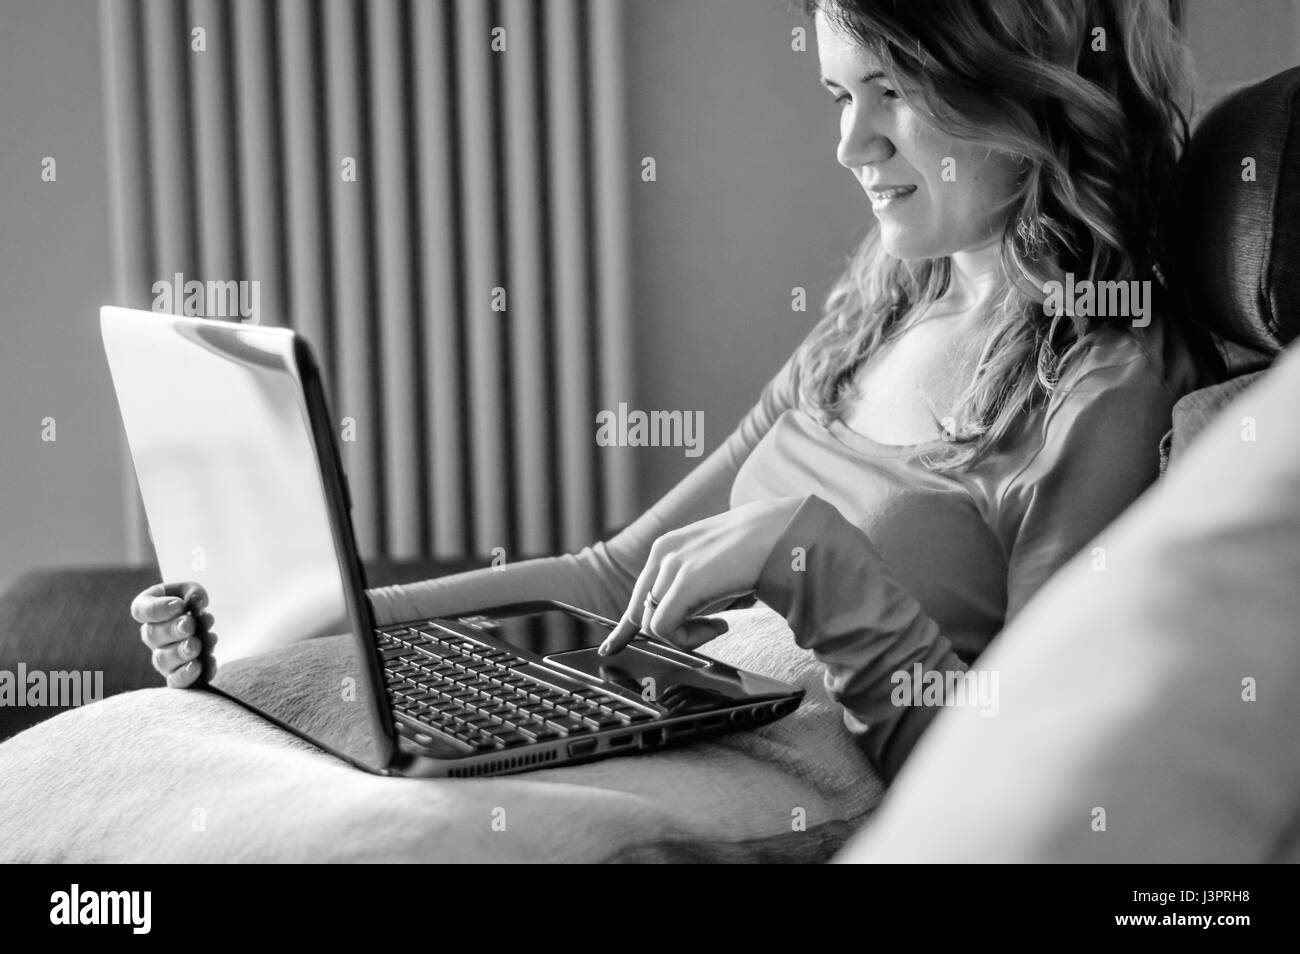 Young woman working from home on laptop on the couch, black and white image Stock Photo